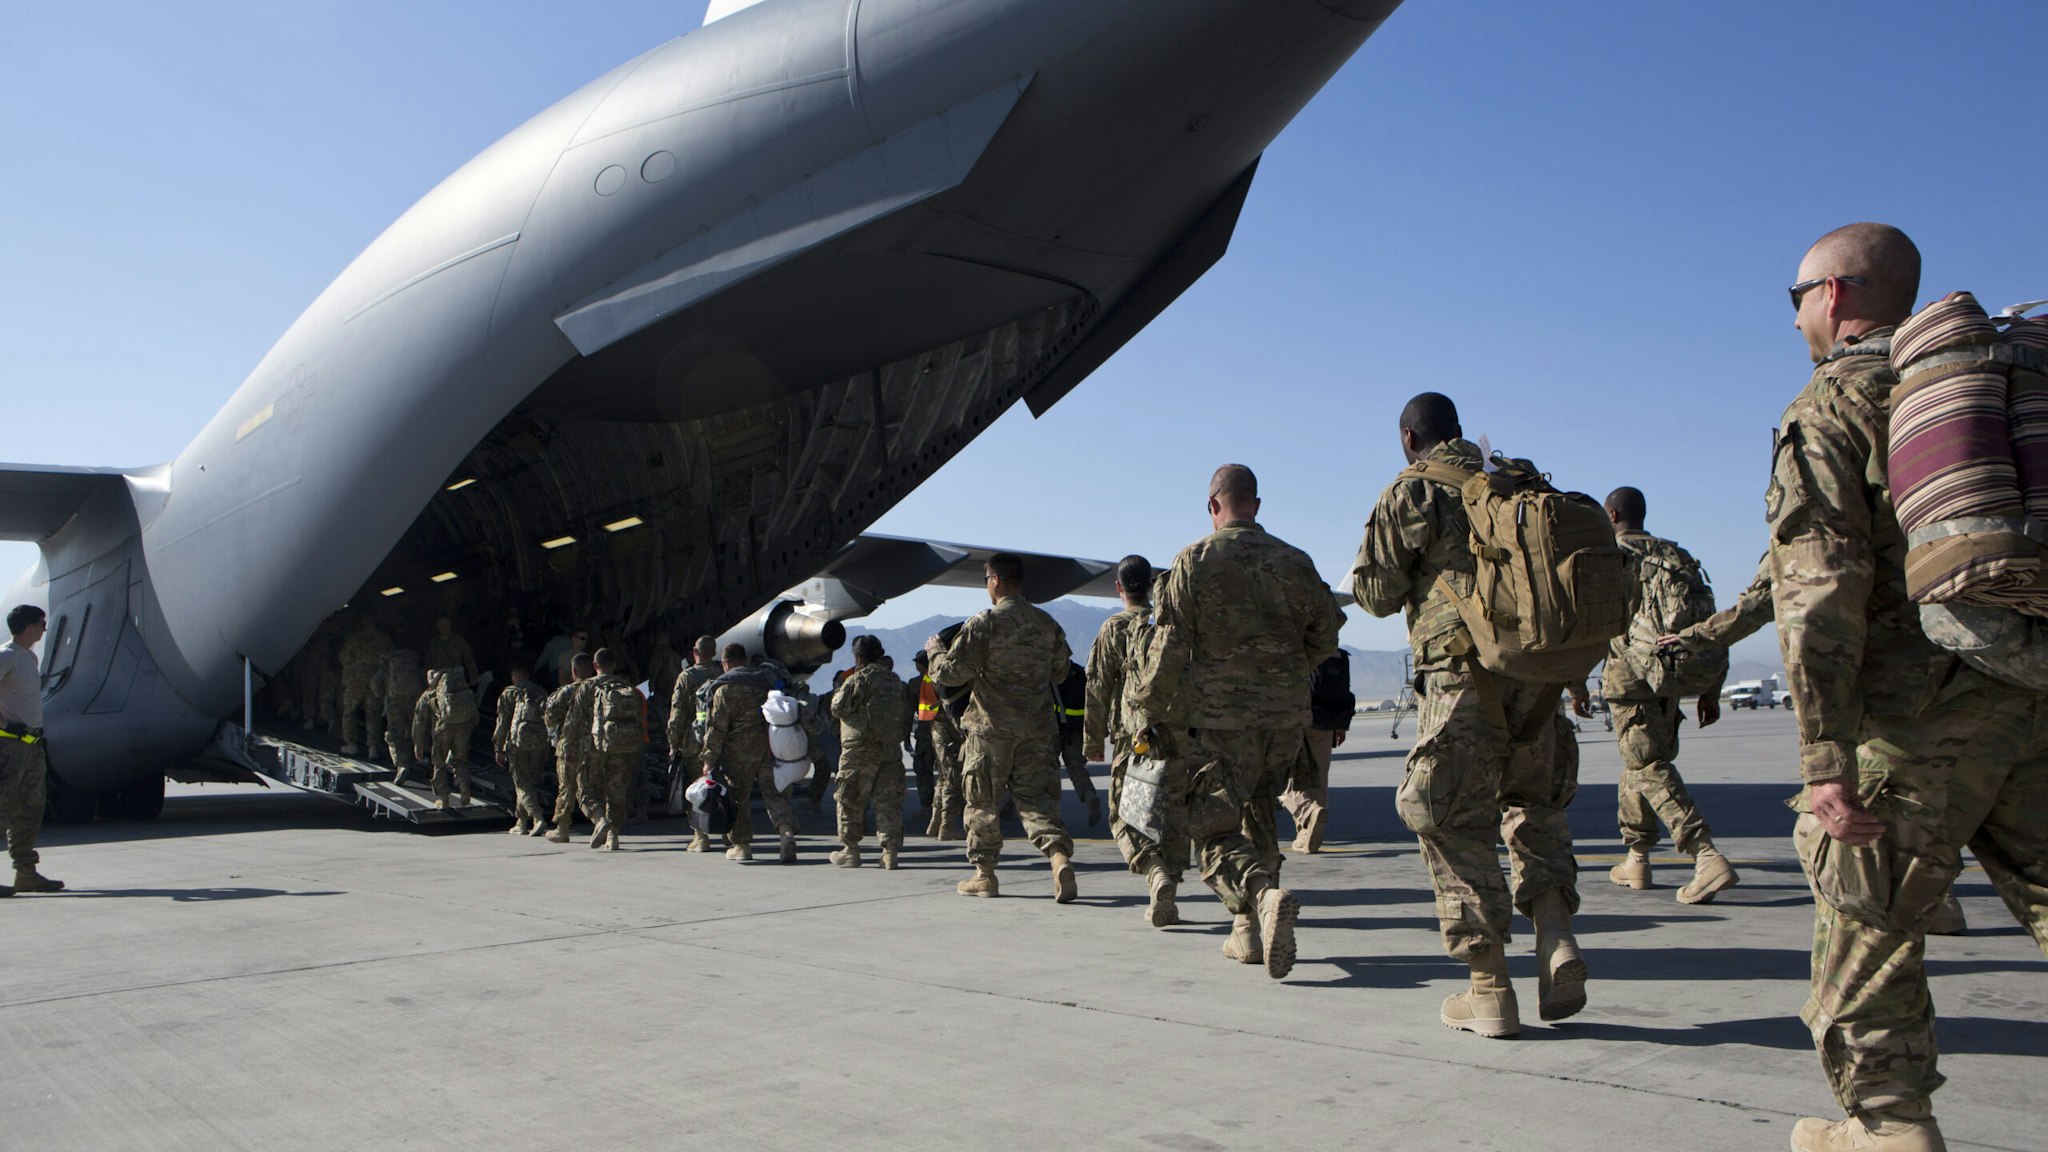 BAGRAM AIR BASE, AFGHANISTAN - MAY 11: U.S. Army soldiers walk to their C-17 cargo plane for departure May 11, 2013 at Bagram Air Base, Afghanistan. U.S. soldiers and marines are part of the NATO troop withdrawal from Afghanistan, to be completed by the end of 2014. (Photo by Robert Nickelsberg/Getty Images)